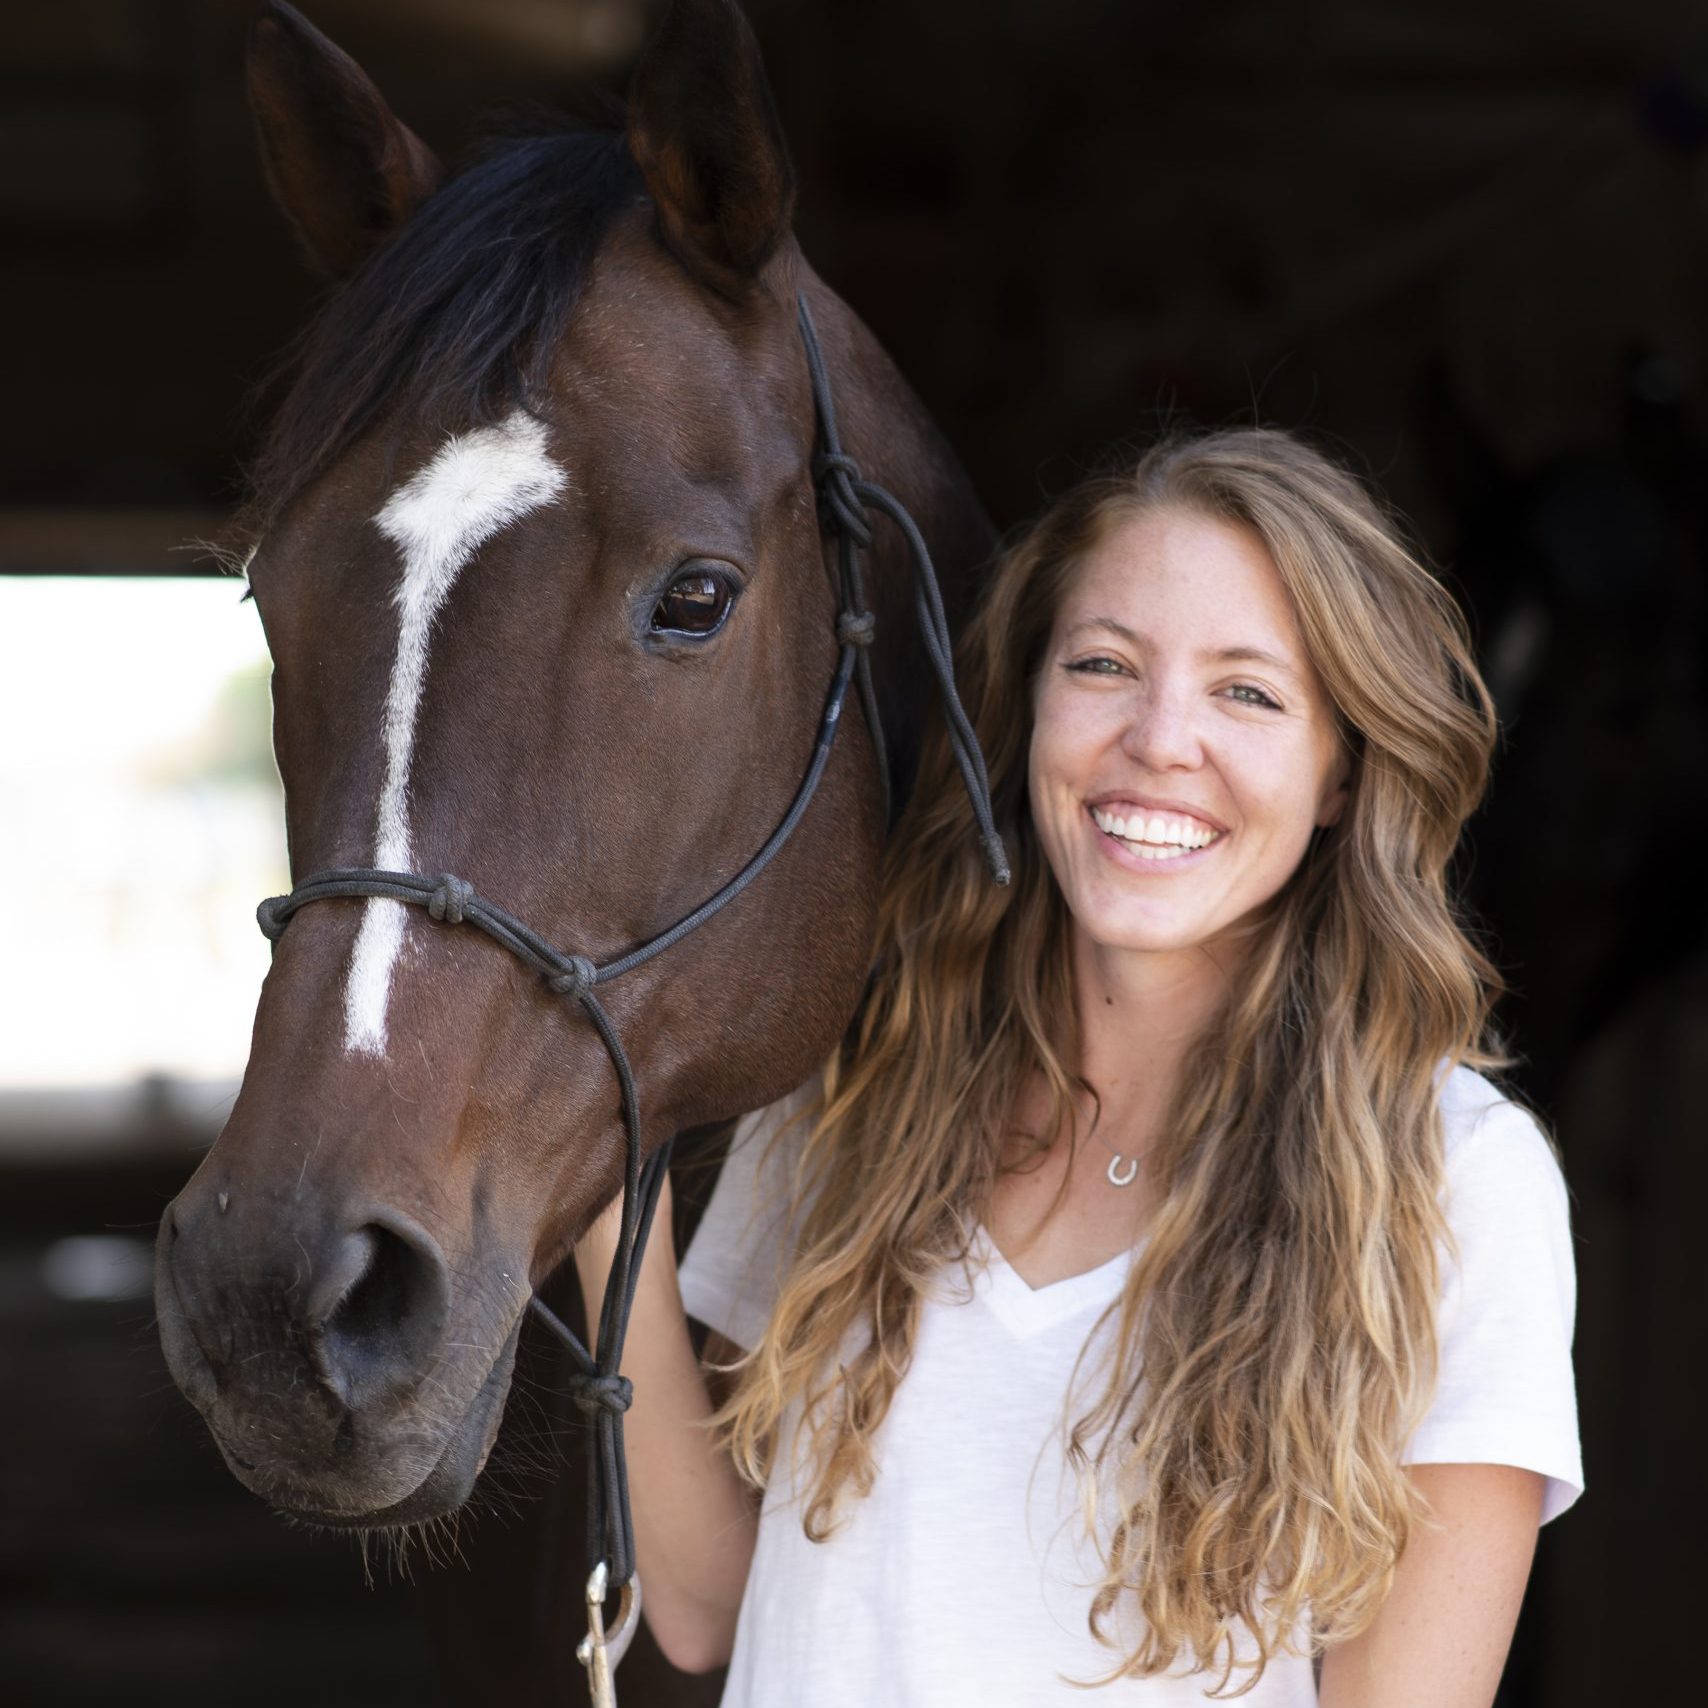 Smiling girl stands next to her bay horse with a white stripe on her face in a dark barn isle.